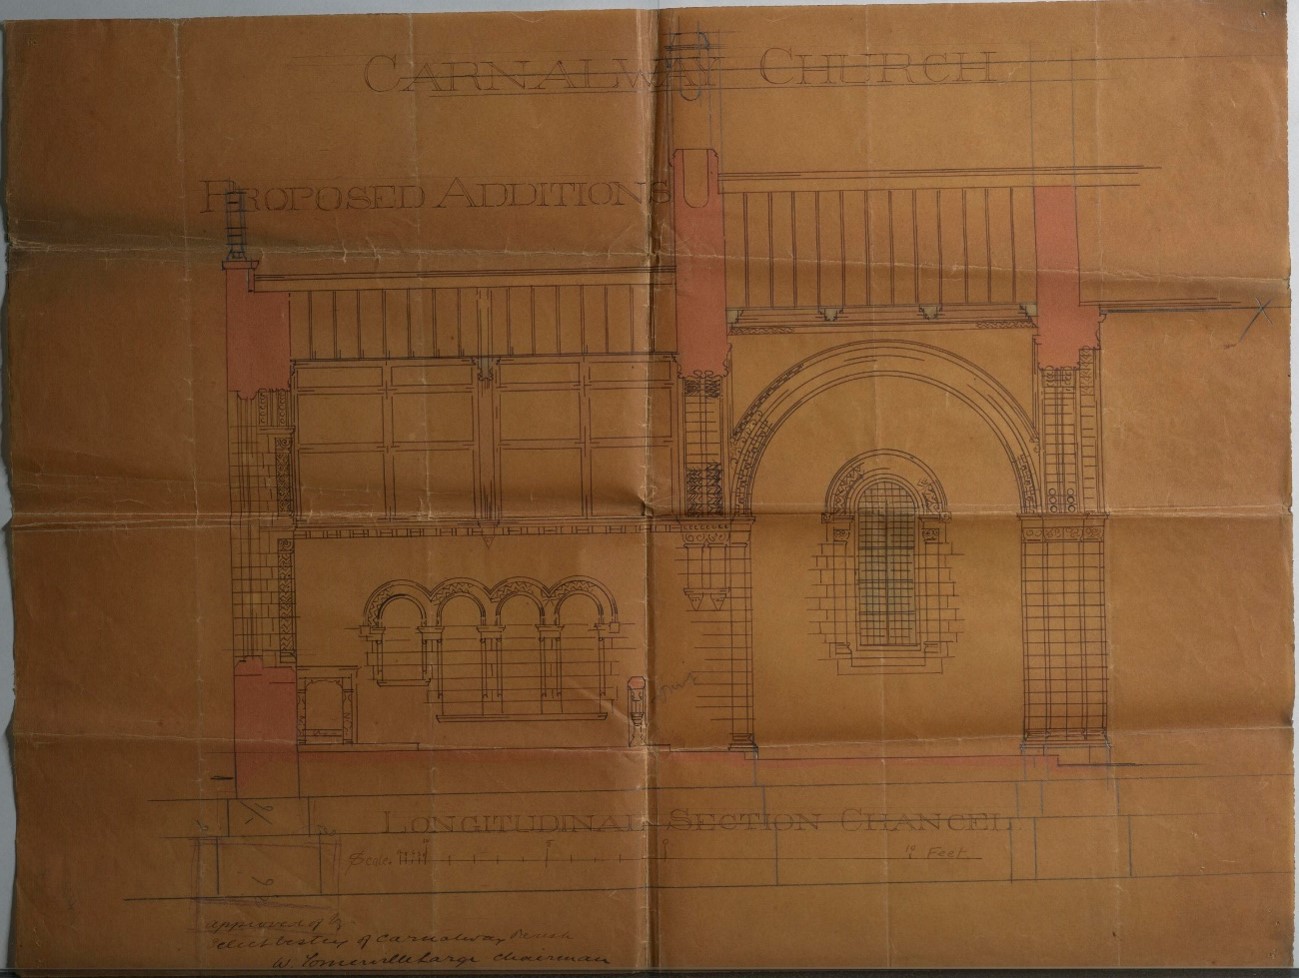 J. F. Fuller, “Carnalway Church. Proposed Additions. Longitudinal Section Chancel. 10ft. Approved by Select Vestry. Chancel Arch. Wall arcade. Chevron Ornament.,” RCB Library - Architectural Drawings, accessed April 4, 2023, https://archdrawing.ireland.anglican.org/items/show/10054.